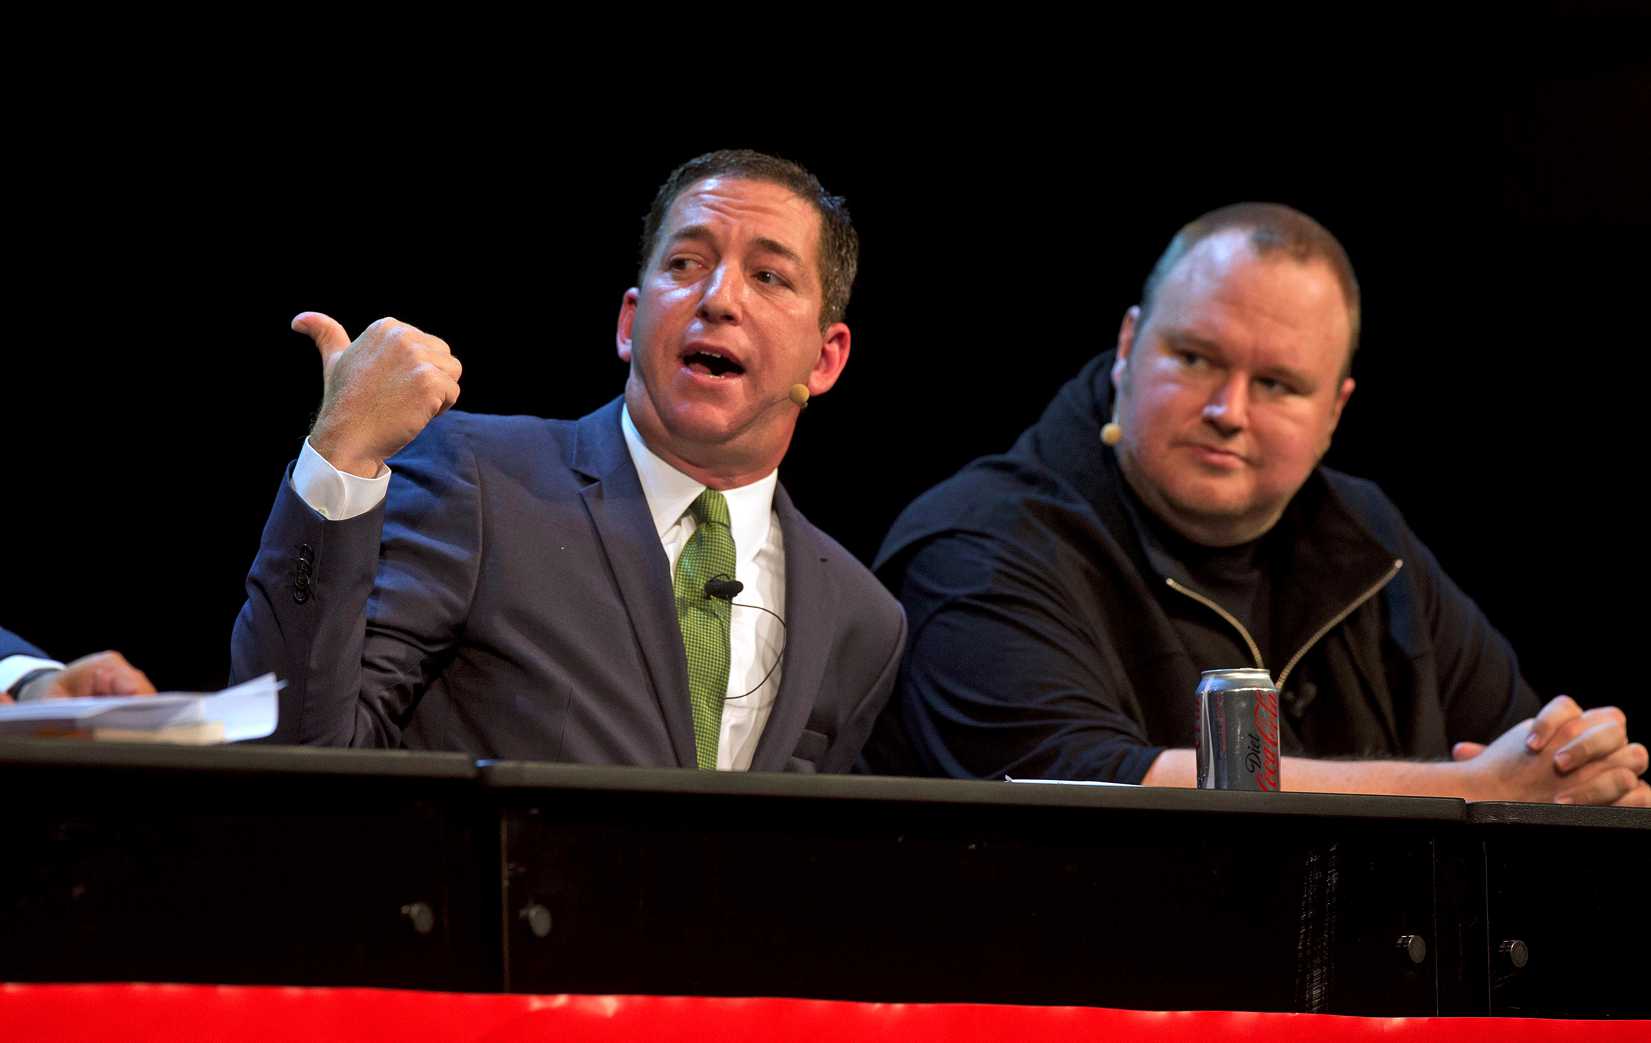 Journalist and author Glenn Greenwald, left, and Kim Dotcom attend a political forum at Town Hall in Auckland, New Zealand Monday, Sept. 15, 2014.